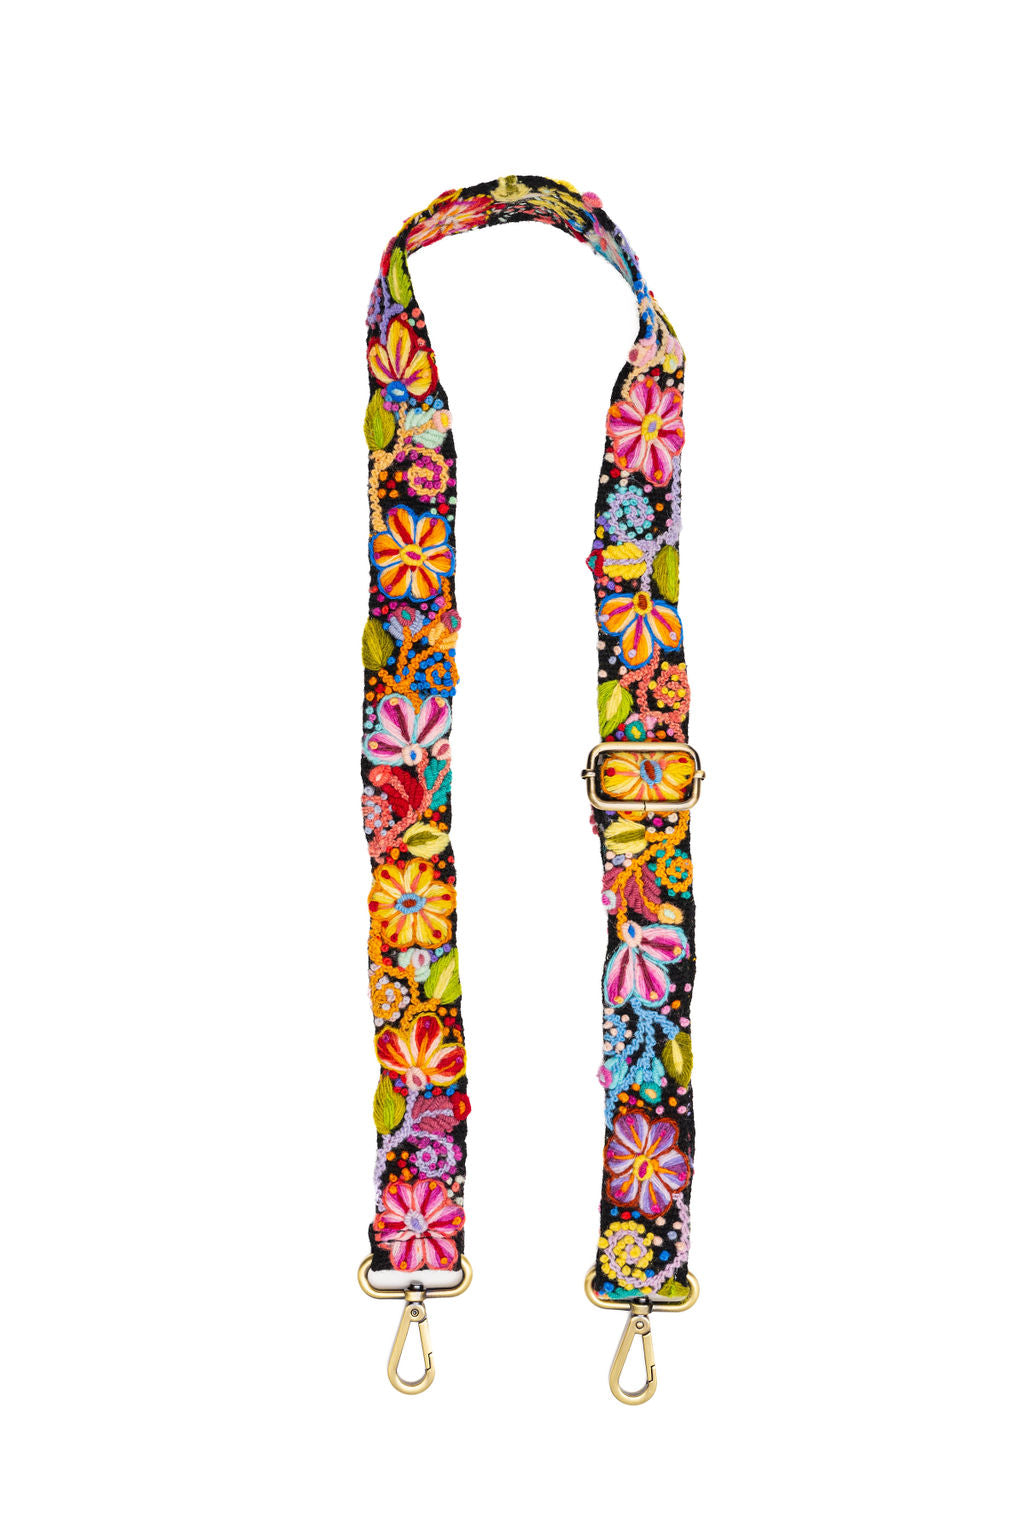 Black Floral Strap featuring vibrant hand-embroidered flowers, adjustable with a gold-colored metal hook, crafted by Fair Trade artisans in Peru.